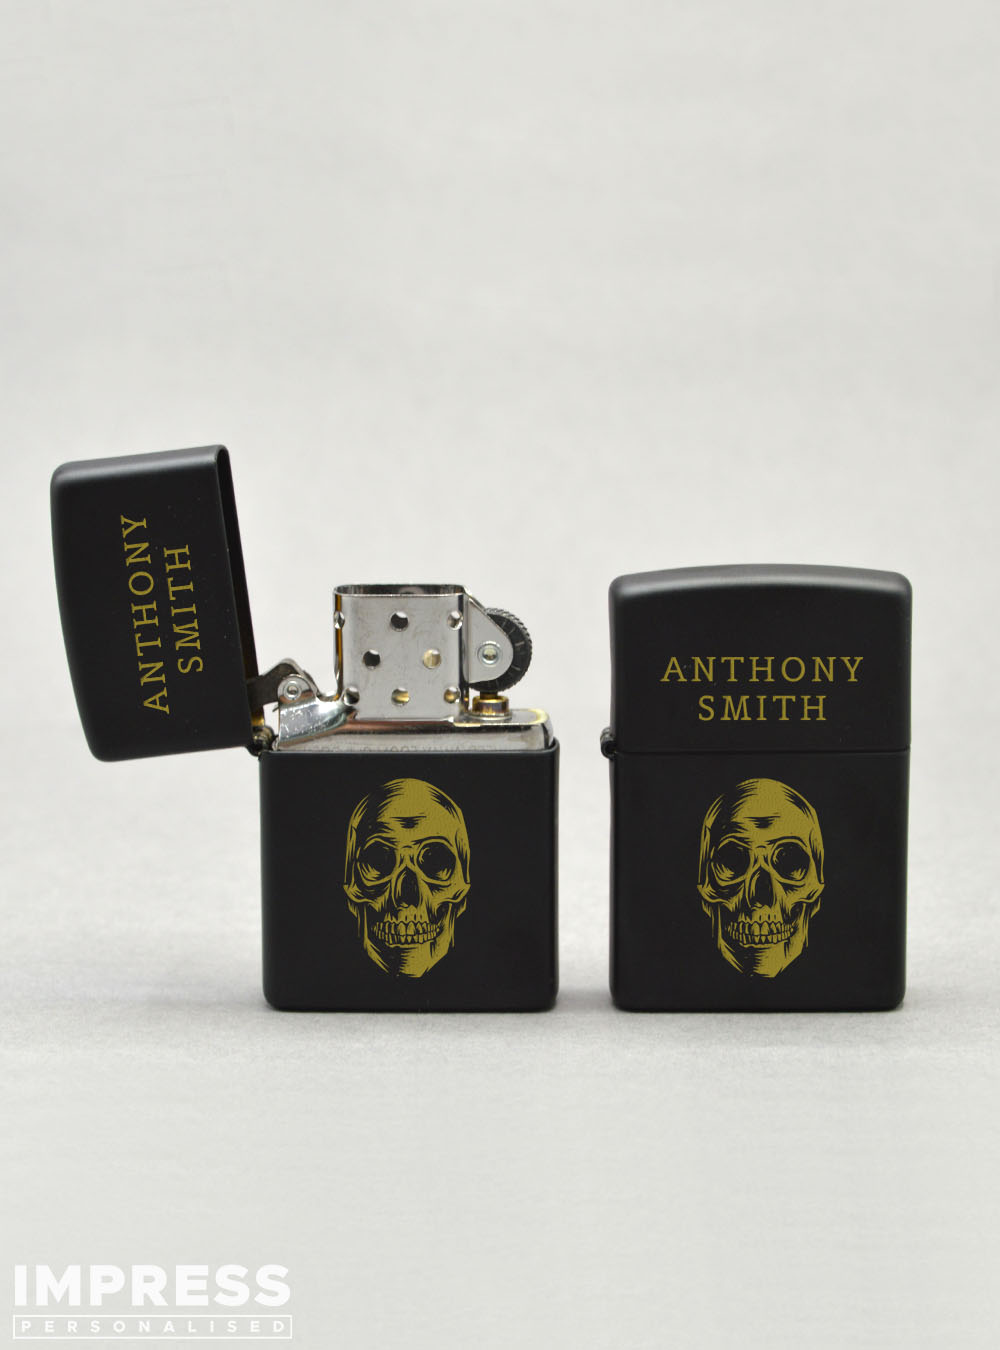 Original Black Zippo Lighter with Personalised Skull Design – Impress Personalised Gifts